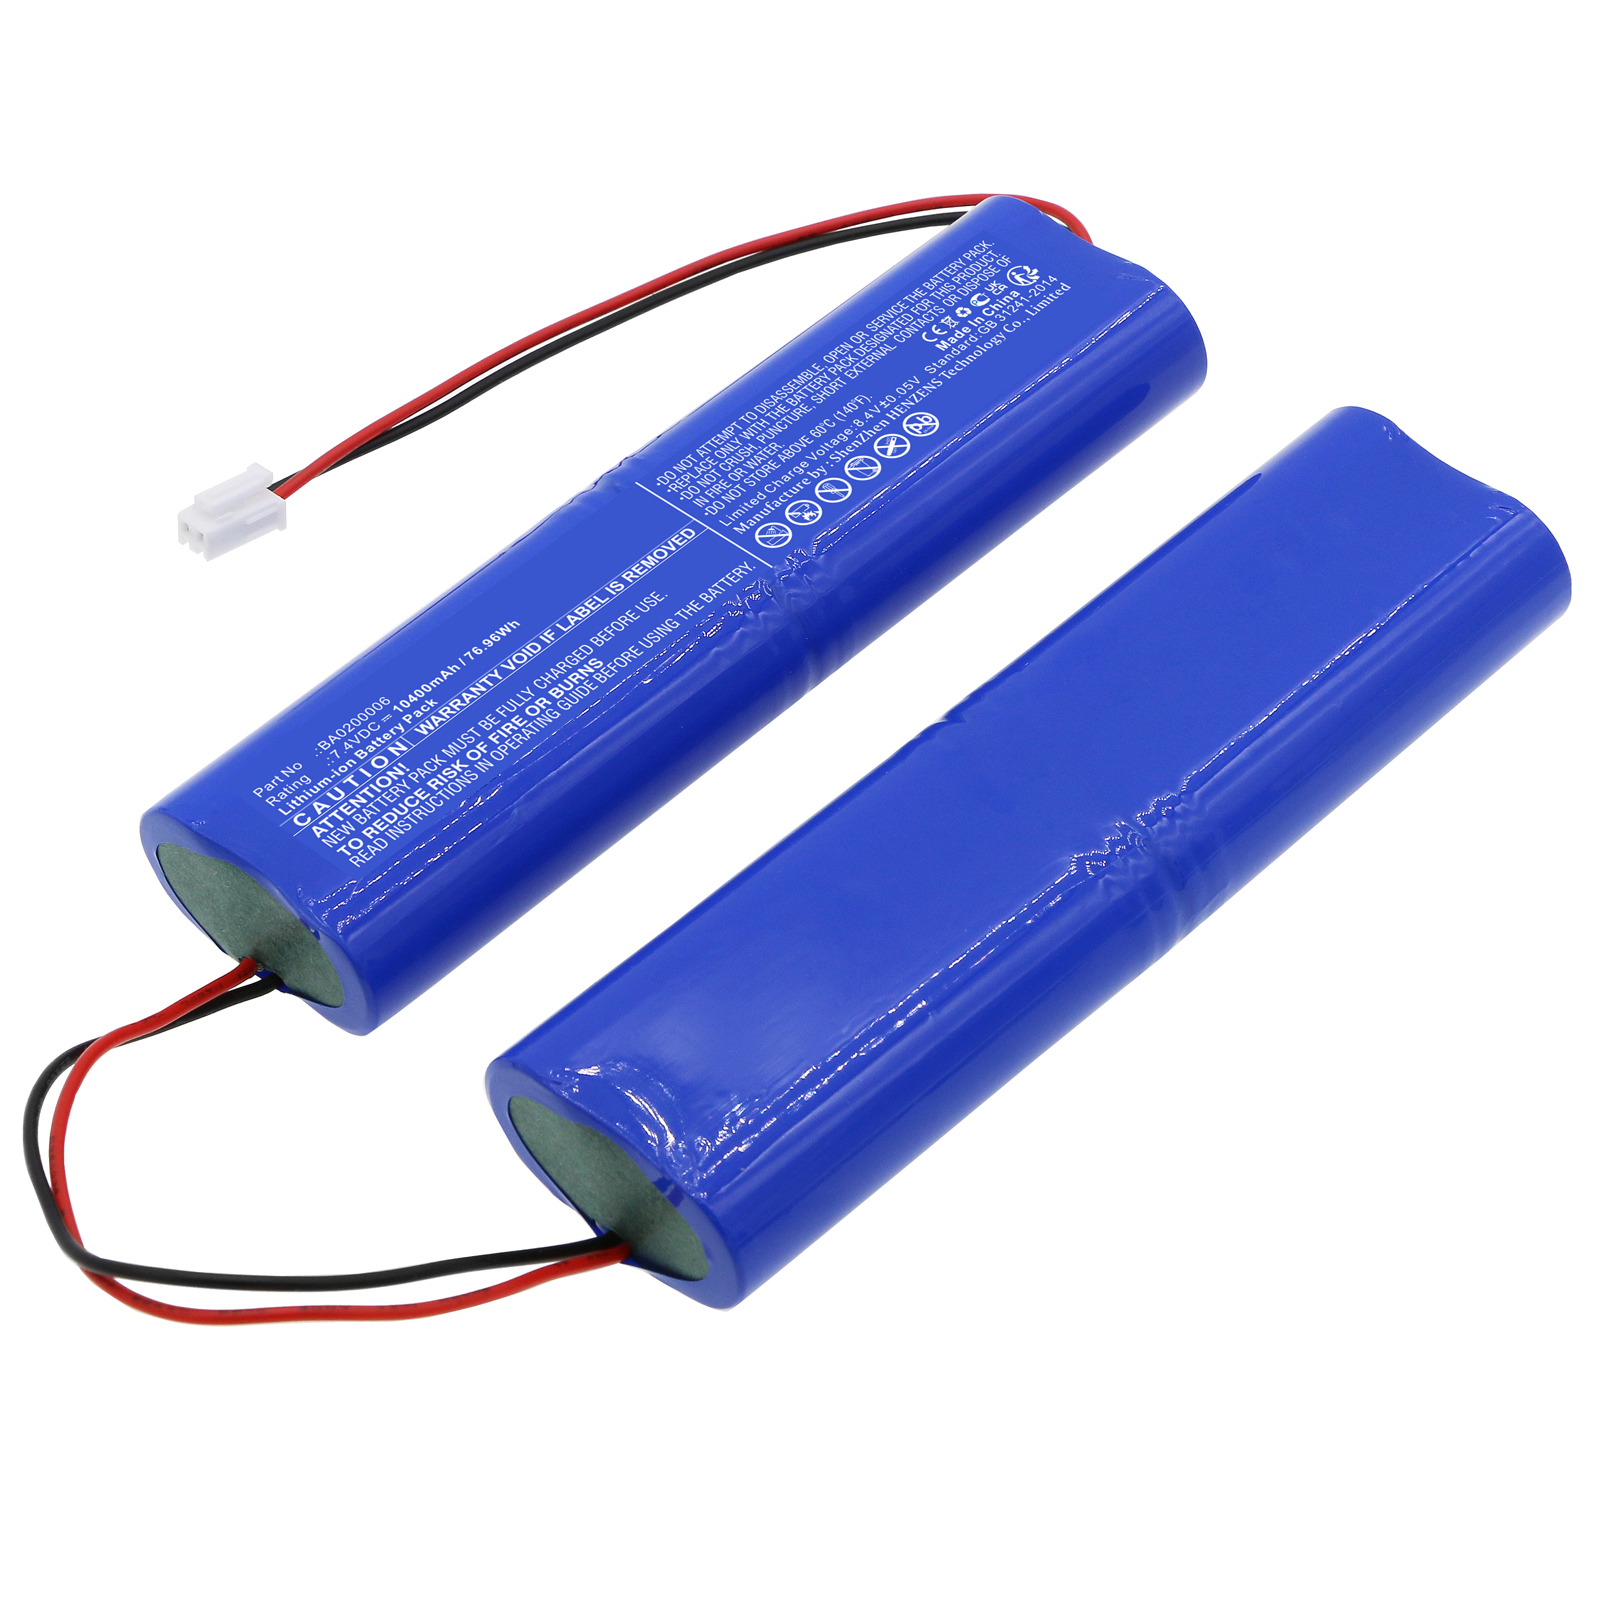 Batteries for SouthernEquipment